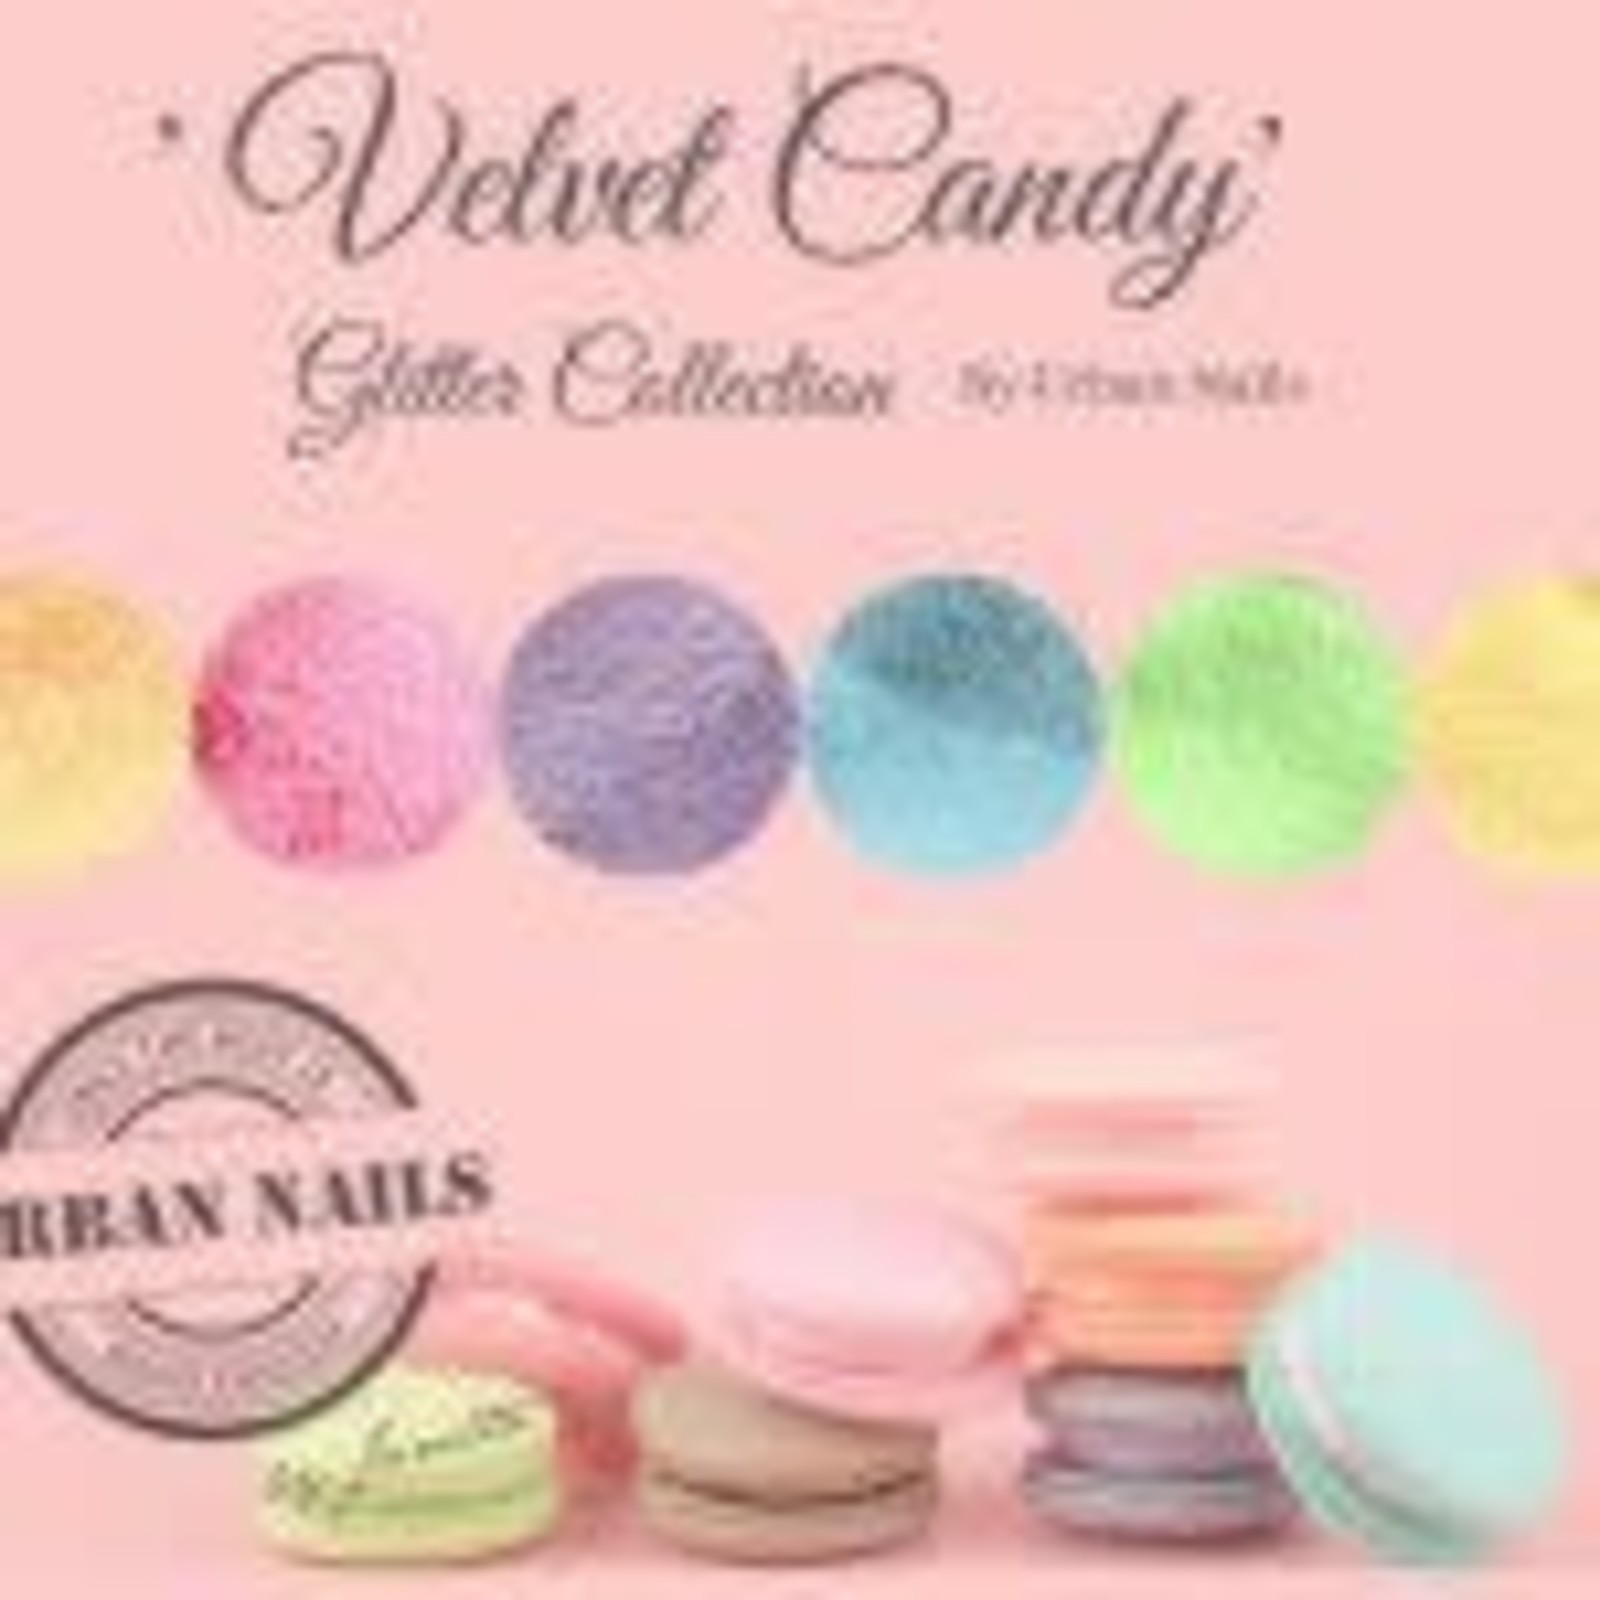 Urban nails Velvet candy glitter collection